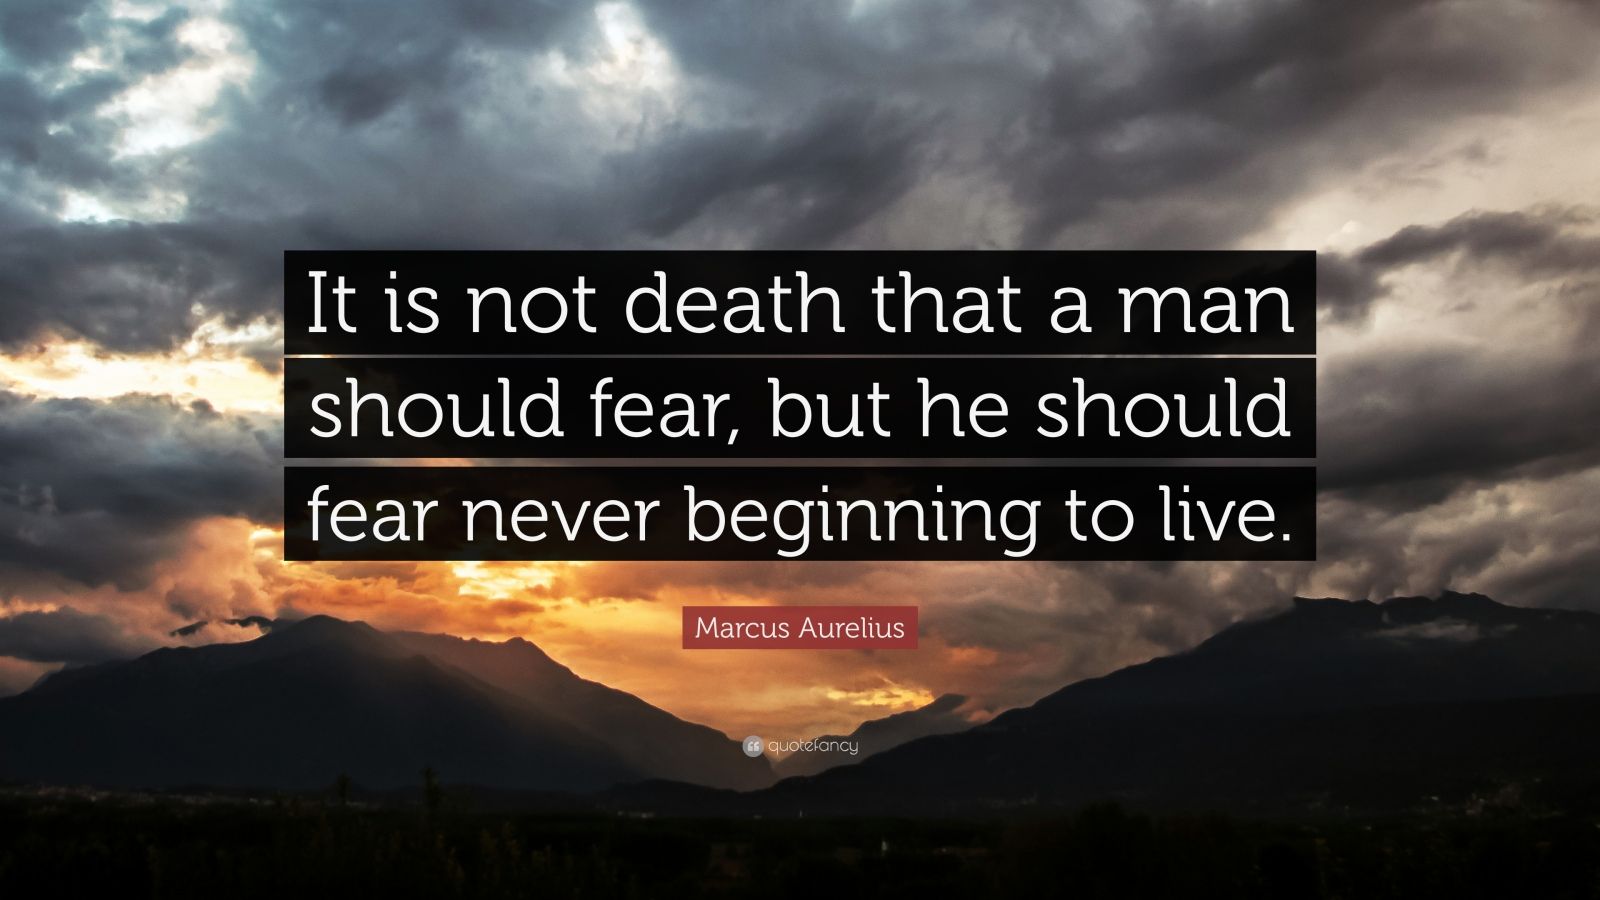 Marcus Aurelius Quote: “It is not death that a man should fear, but he